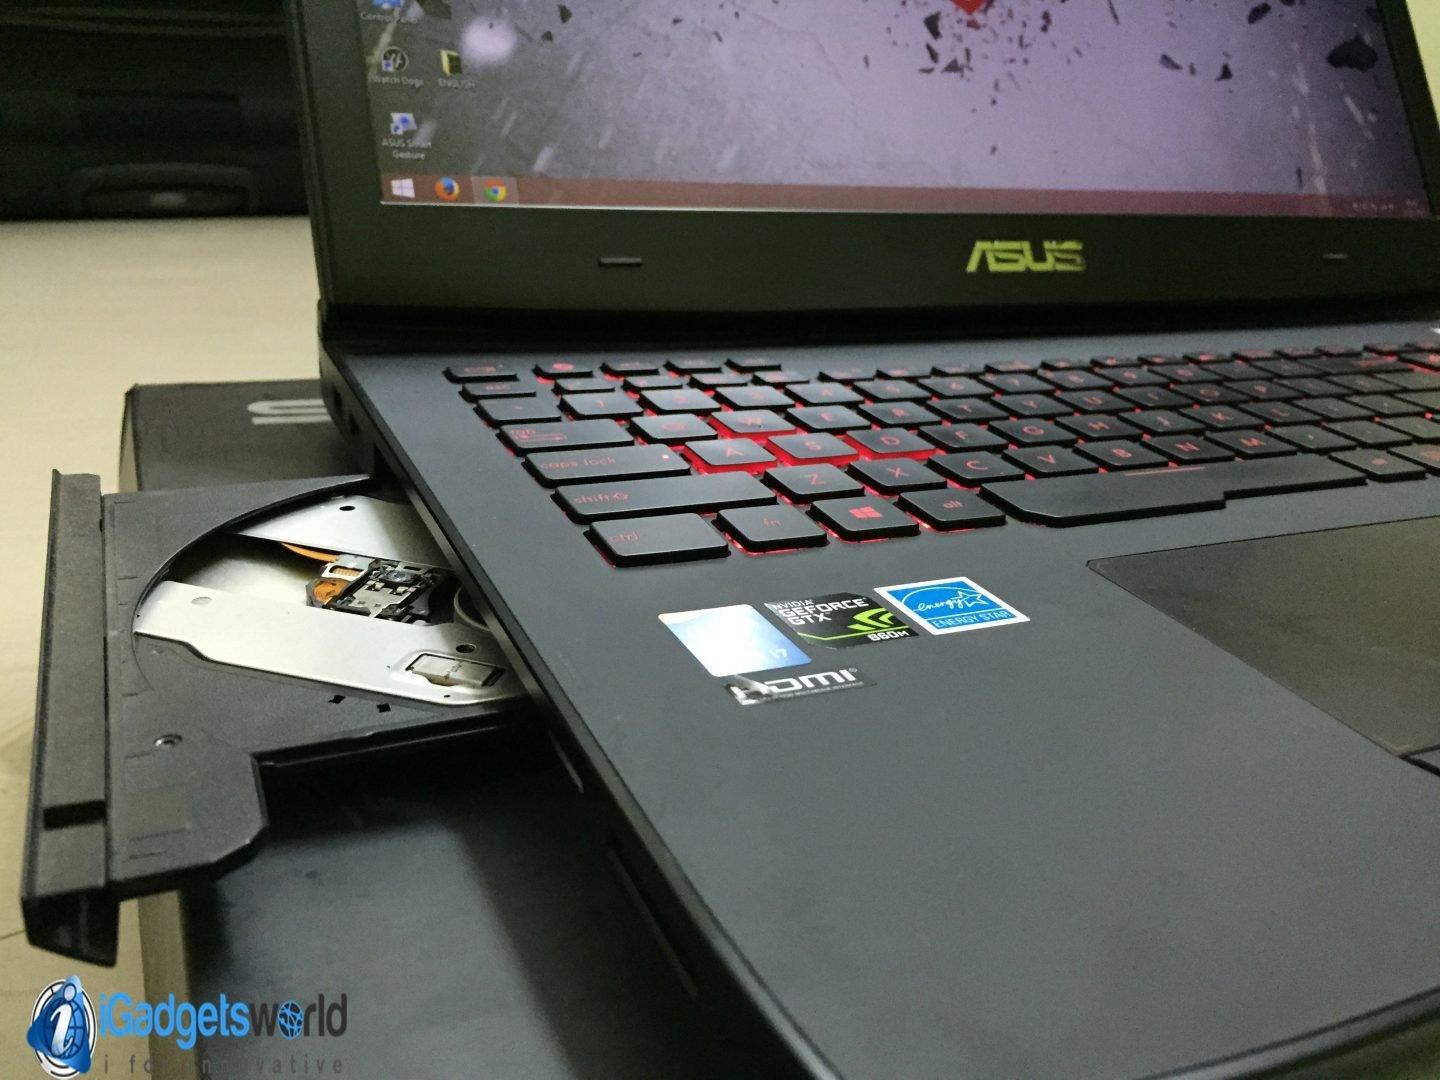 Asus ROG G751J Review: A Slightly Overpriced Ultra High-End Gaming Laptop - 6